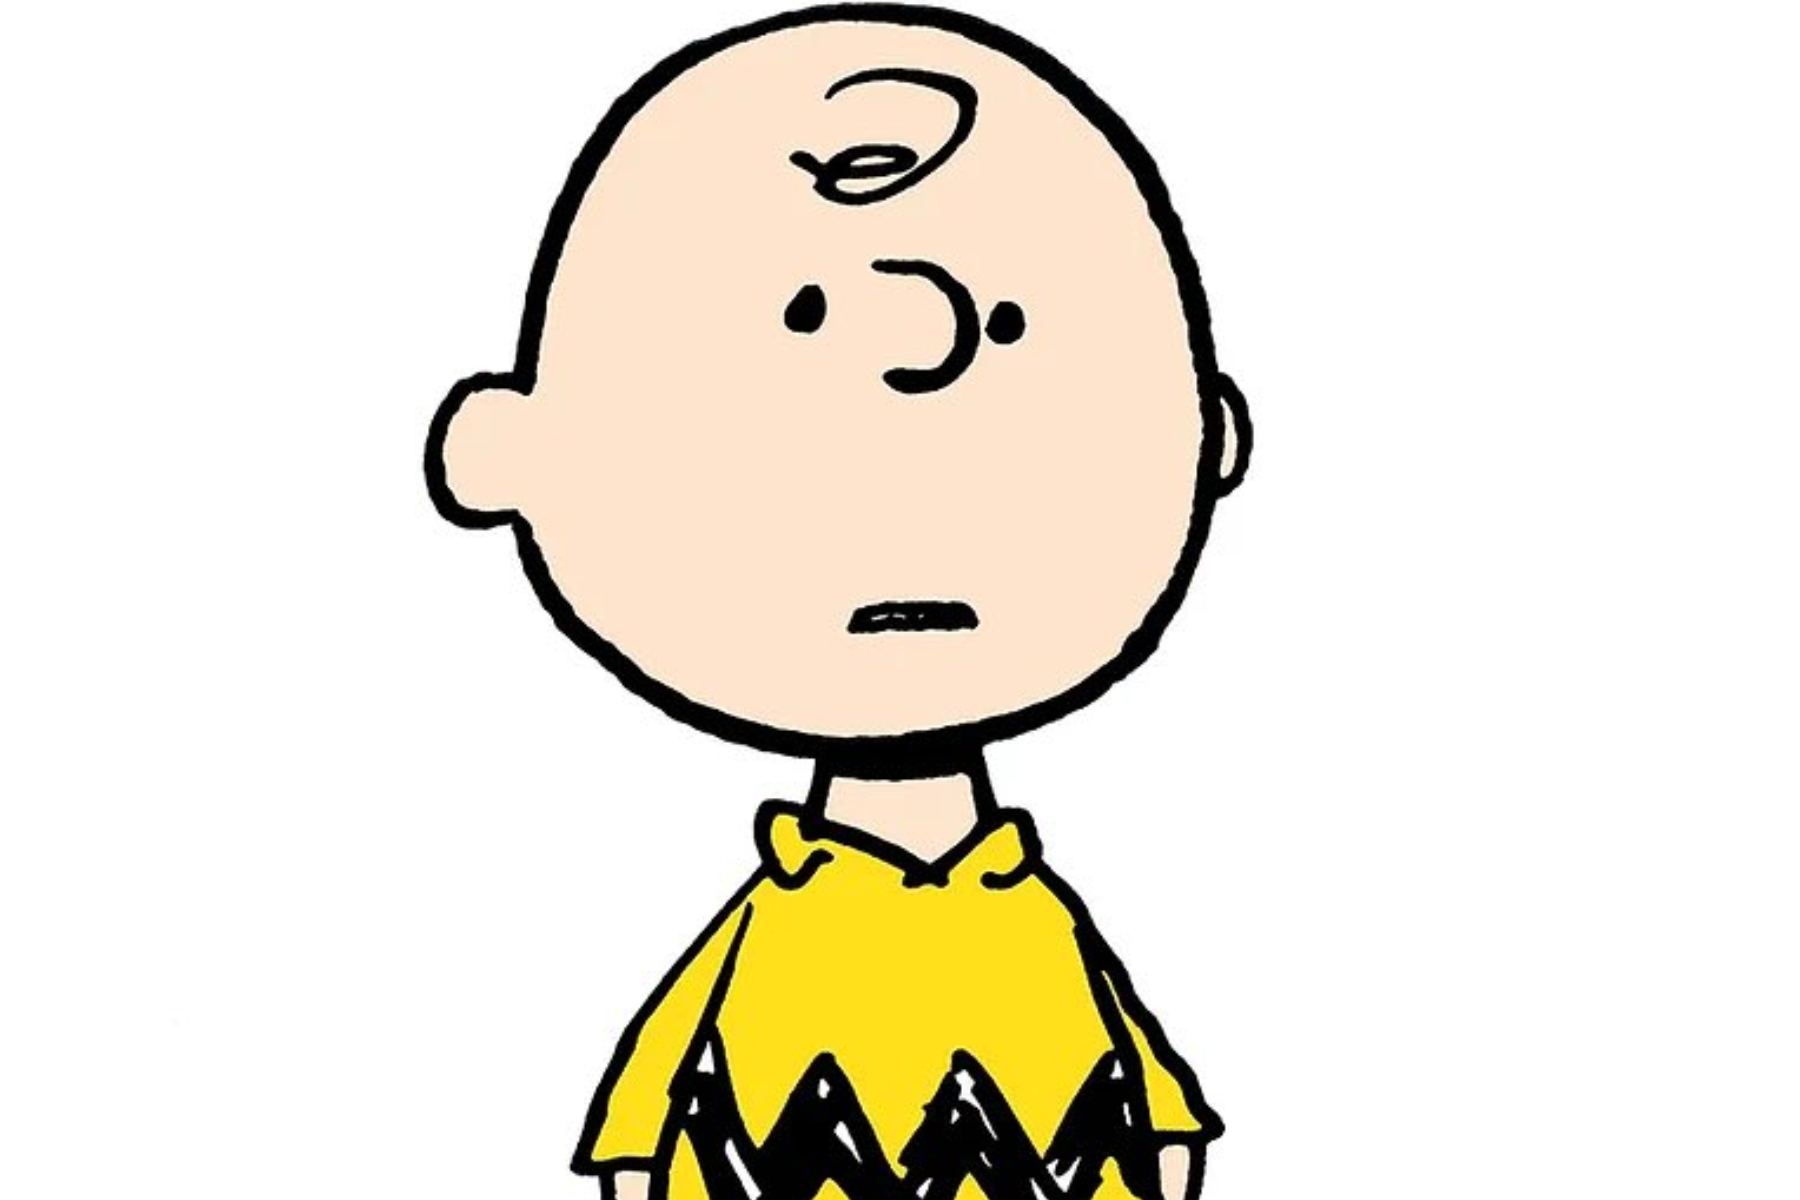 Charlie Brown stands against a white background